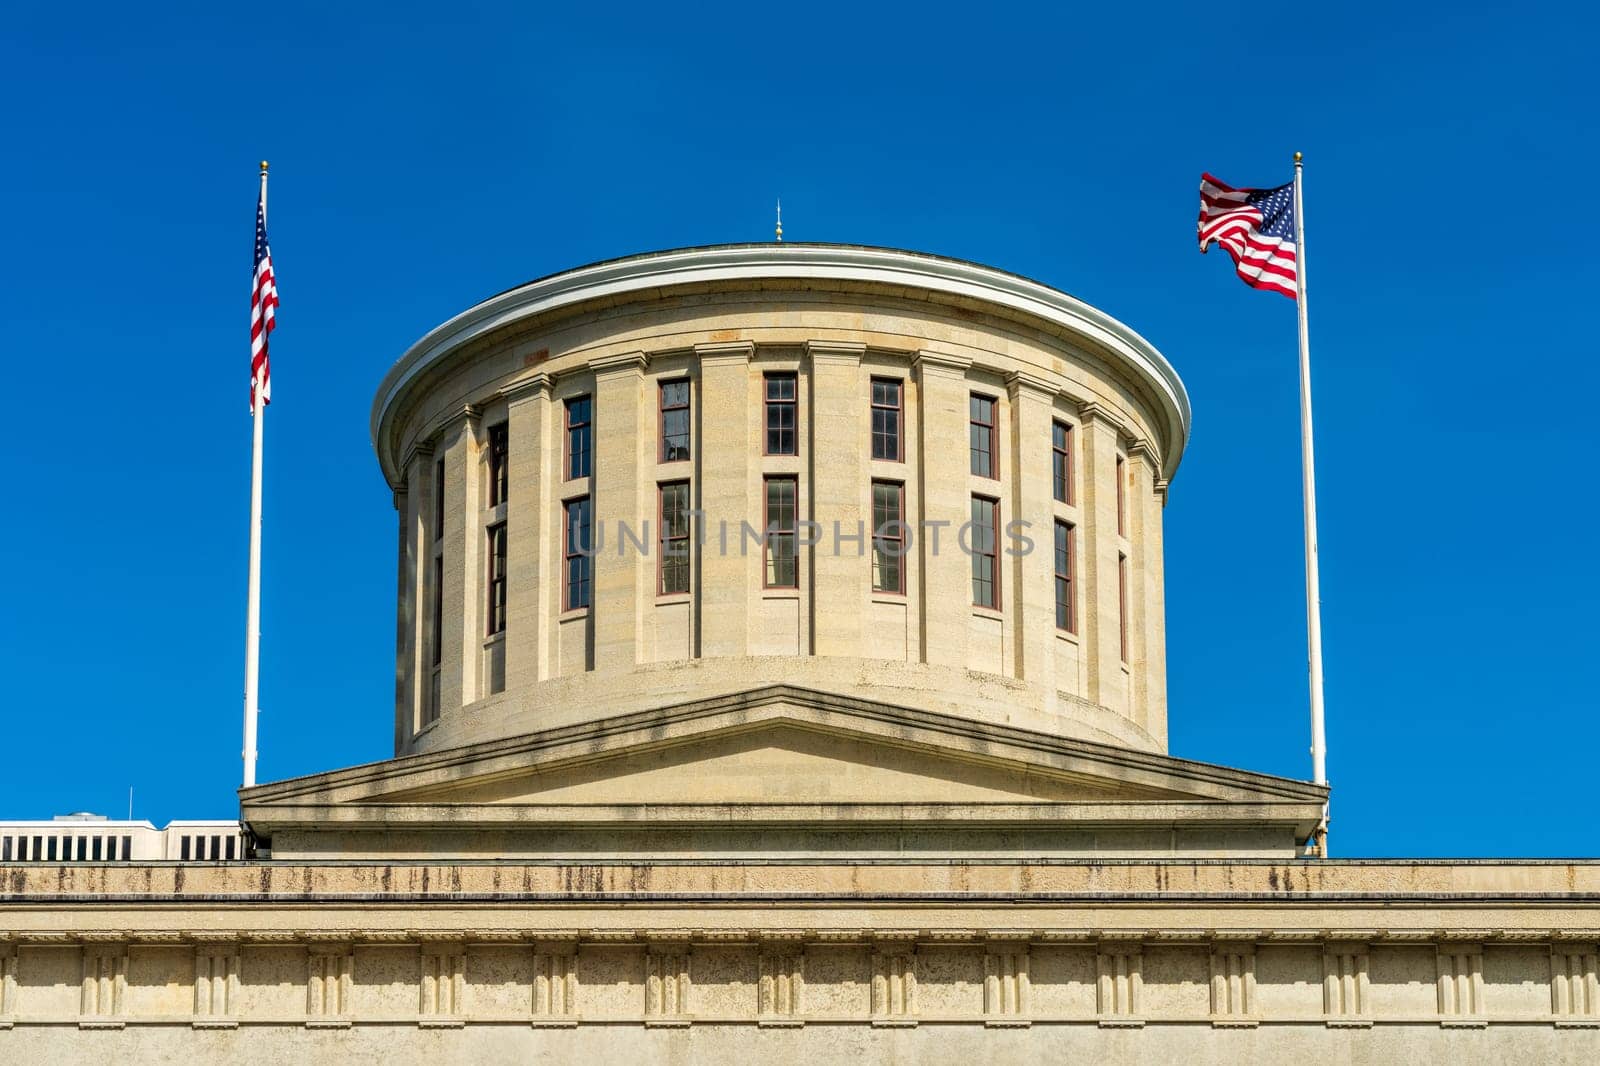 Rotunda and dome of State Capitol building in Columbus Ohio by steheap